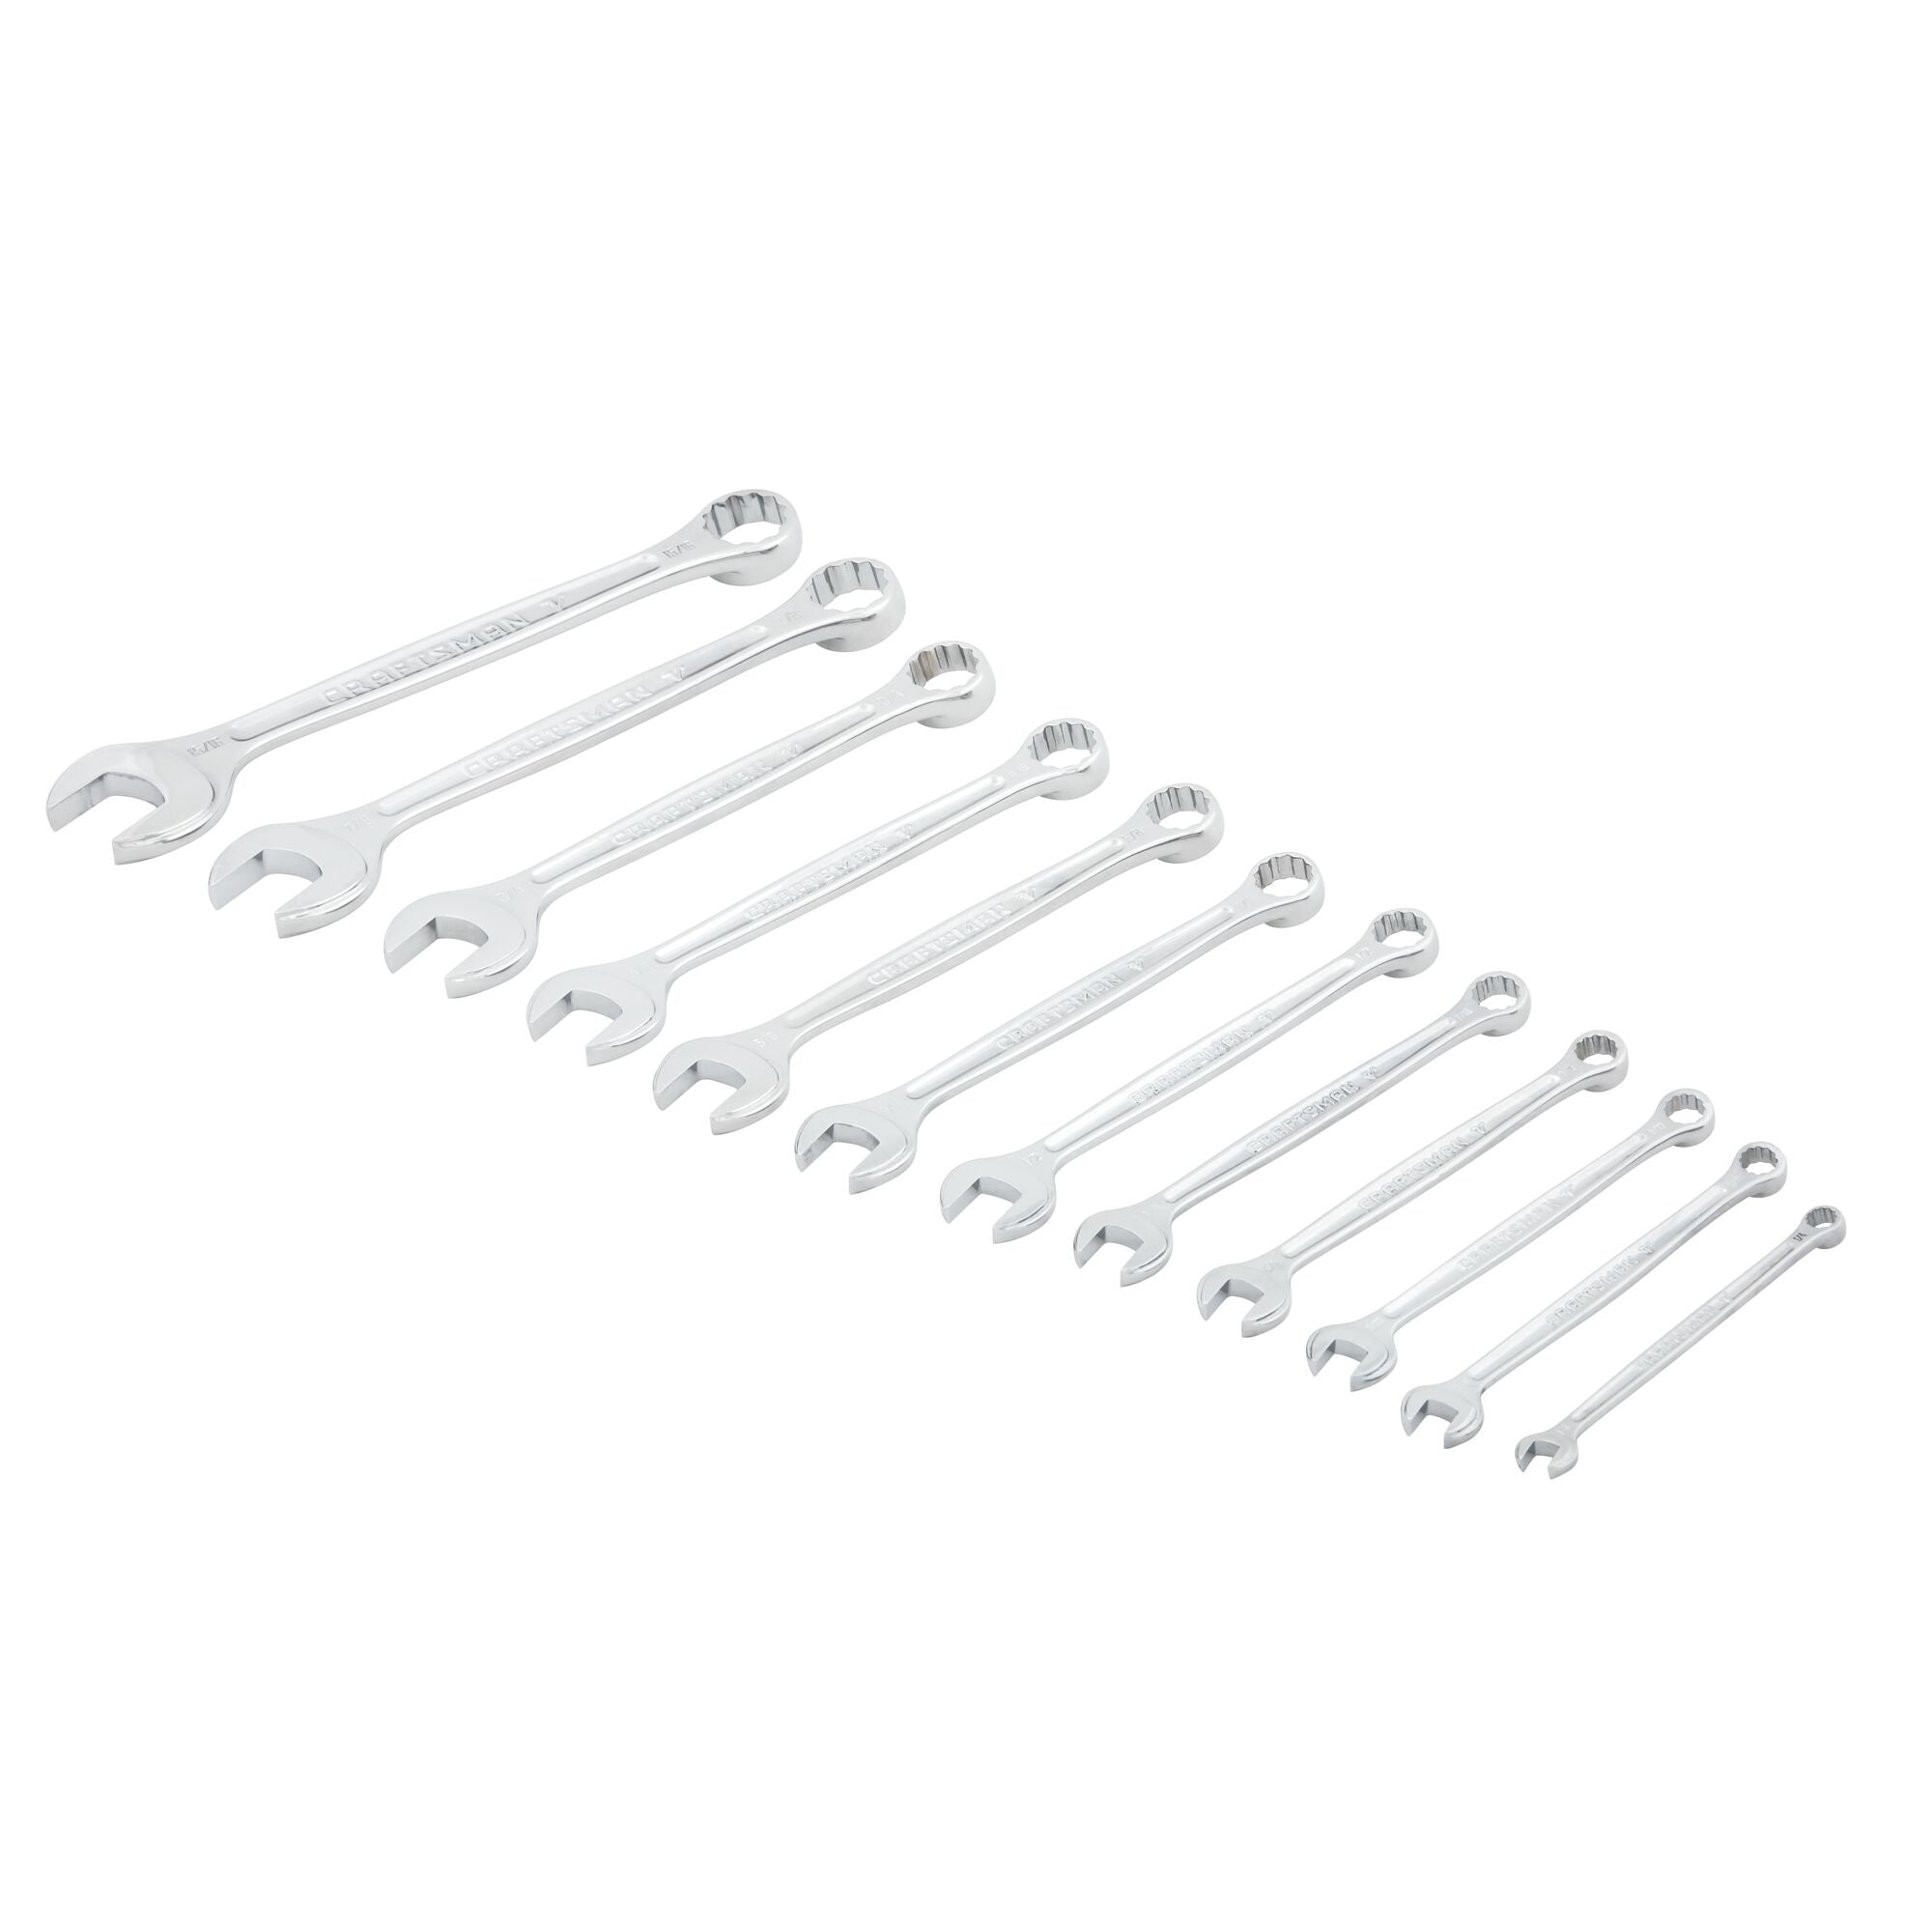 V-Series™ SAE Combination Wrench Set (12 pc) | CRAFTSMAN